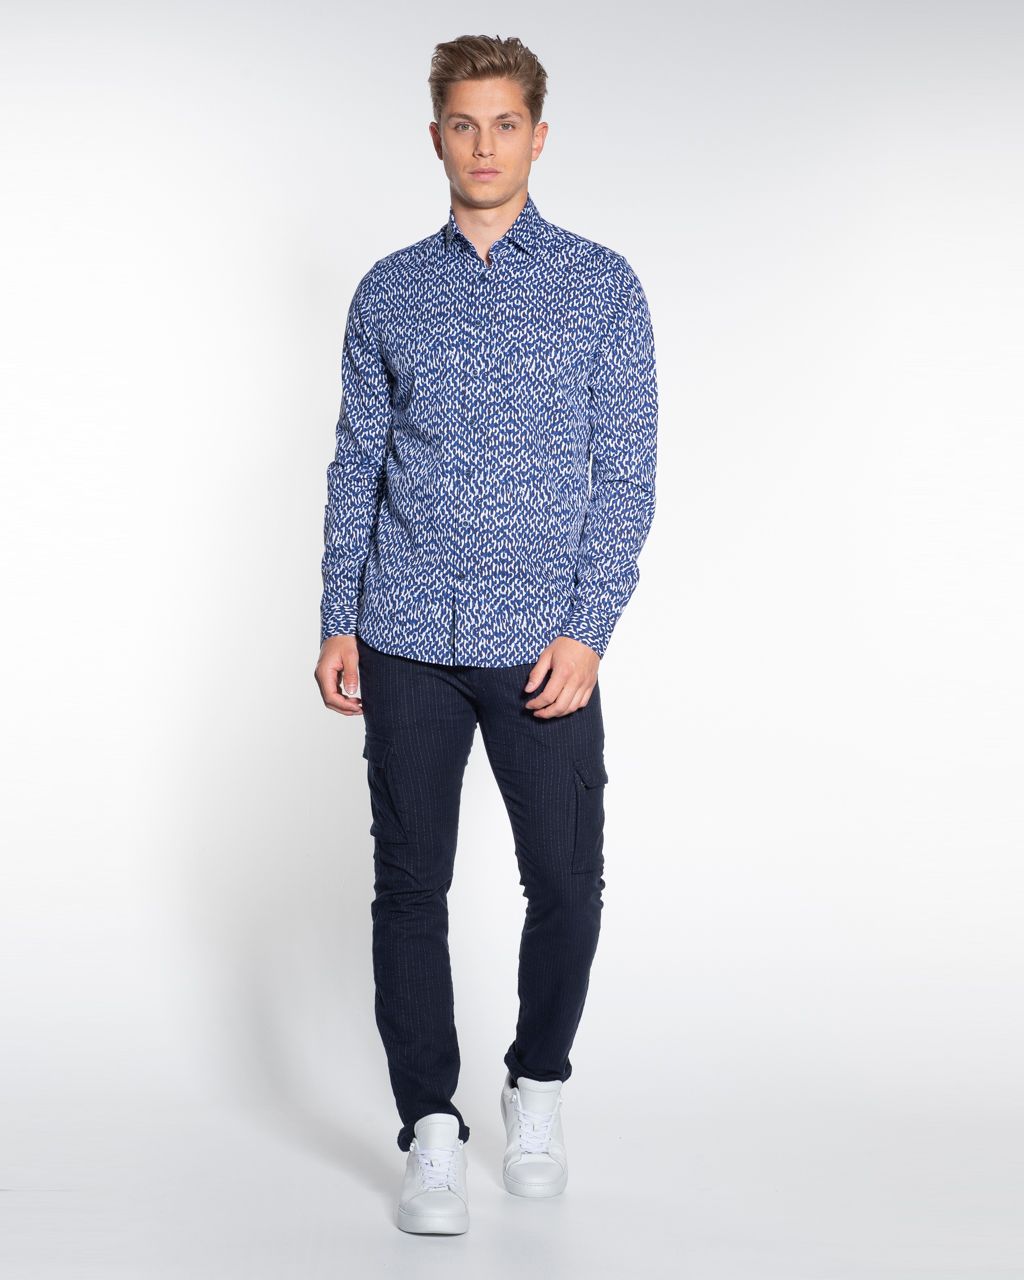 Blue Industry Casual Overhemd LM Blauw 052226-001-37